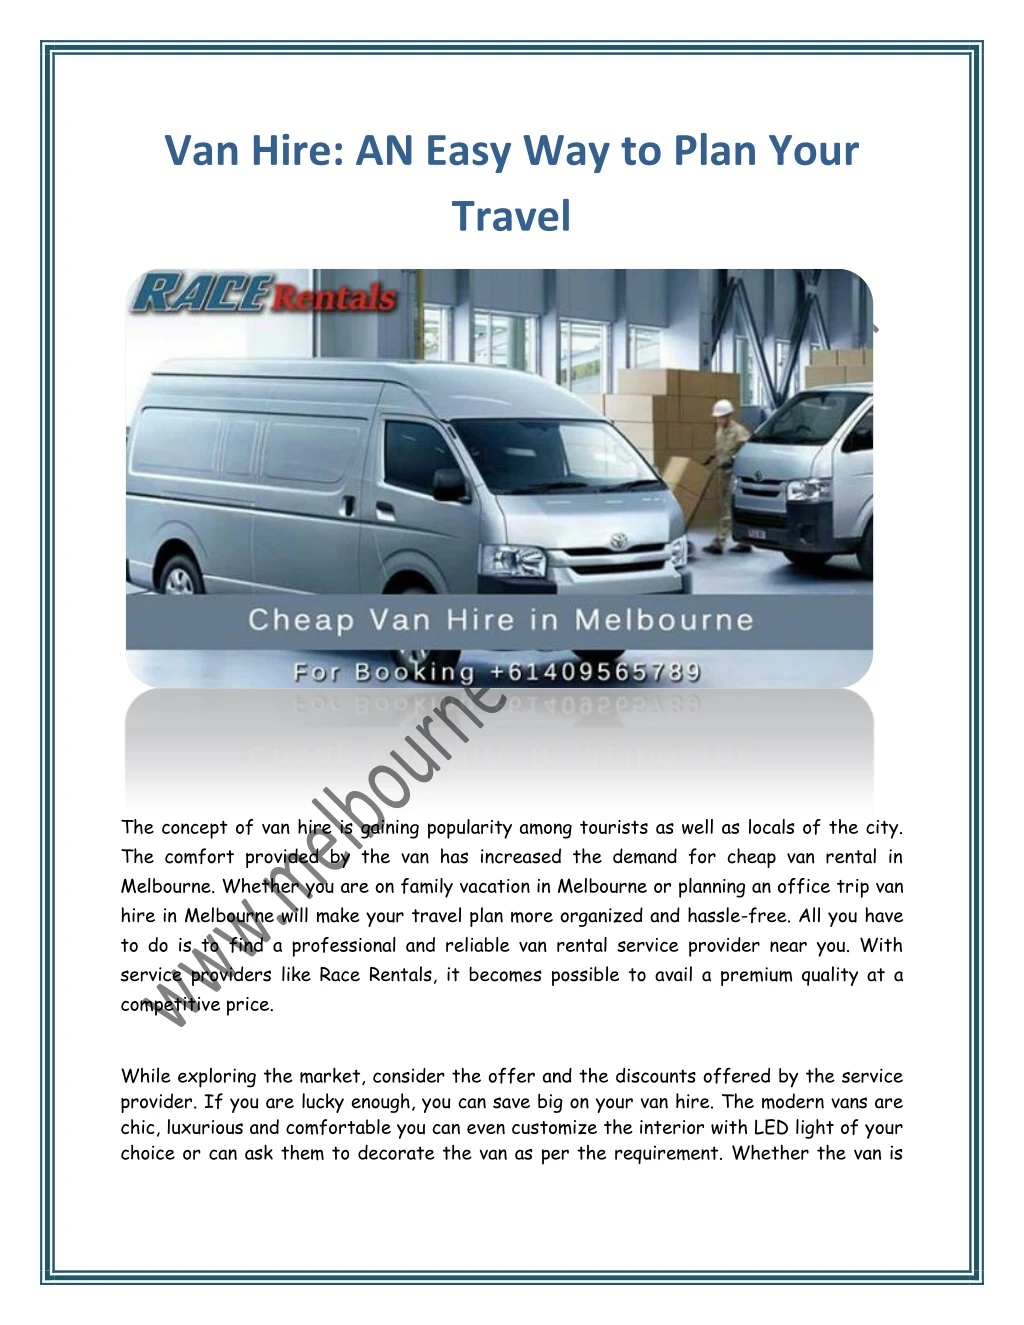 van hire an easy way to plan your travel